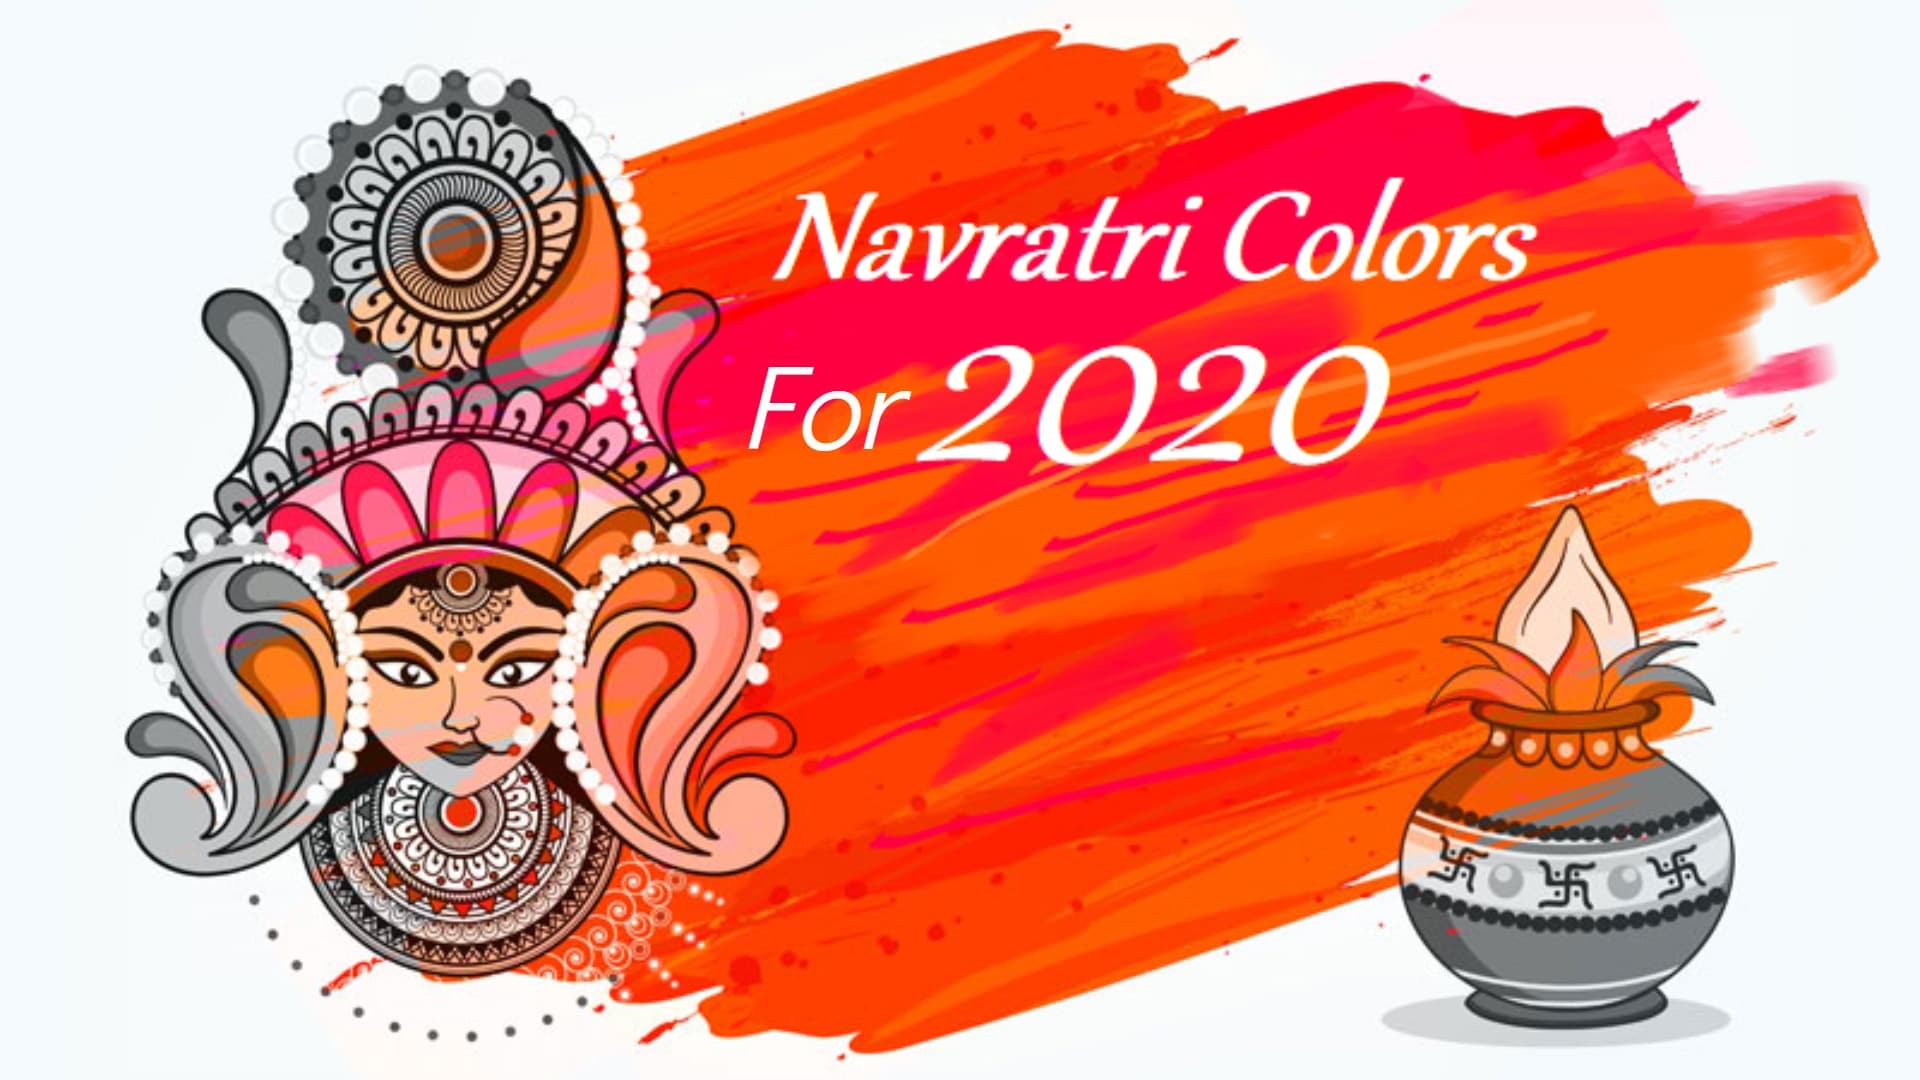 9 Navratri Colors List With Their Significance For 2020